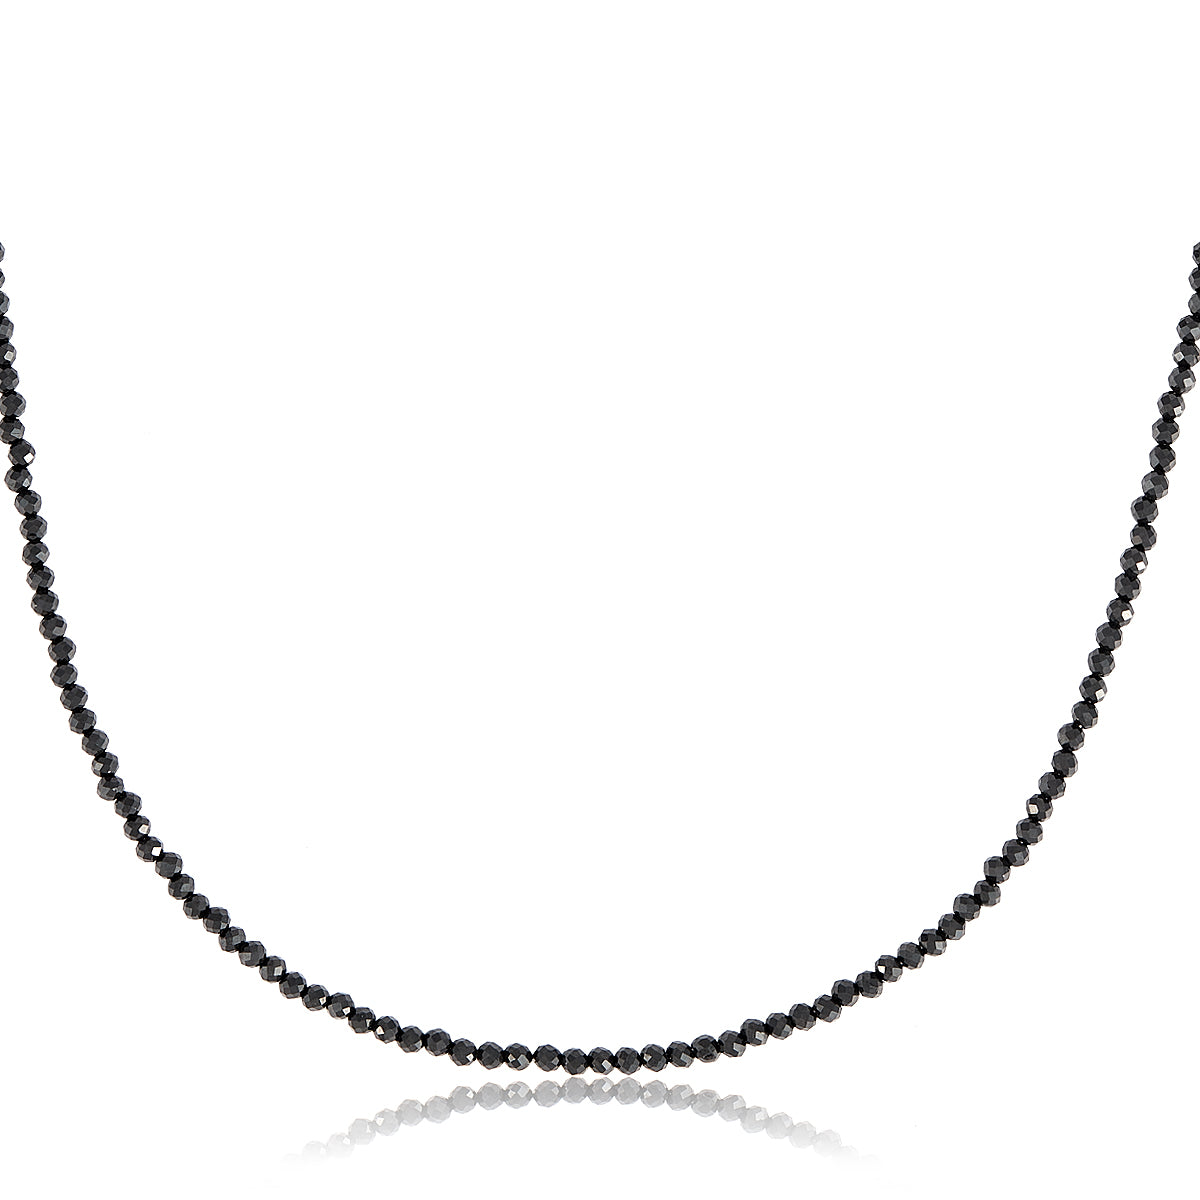 BLACK SPINEL NECKLACE WITH SILVER CLASP